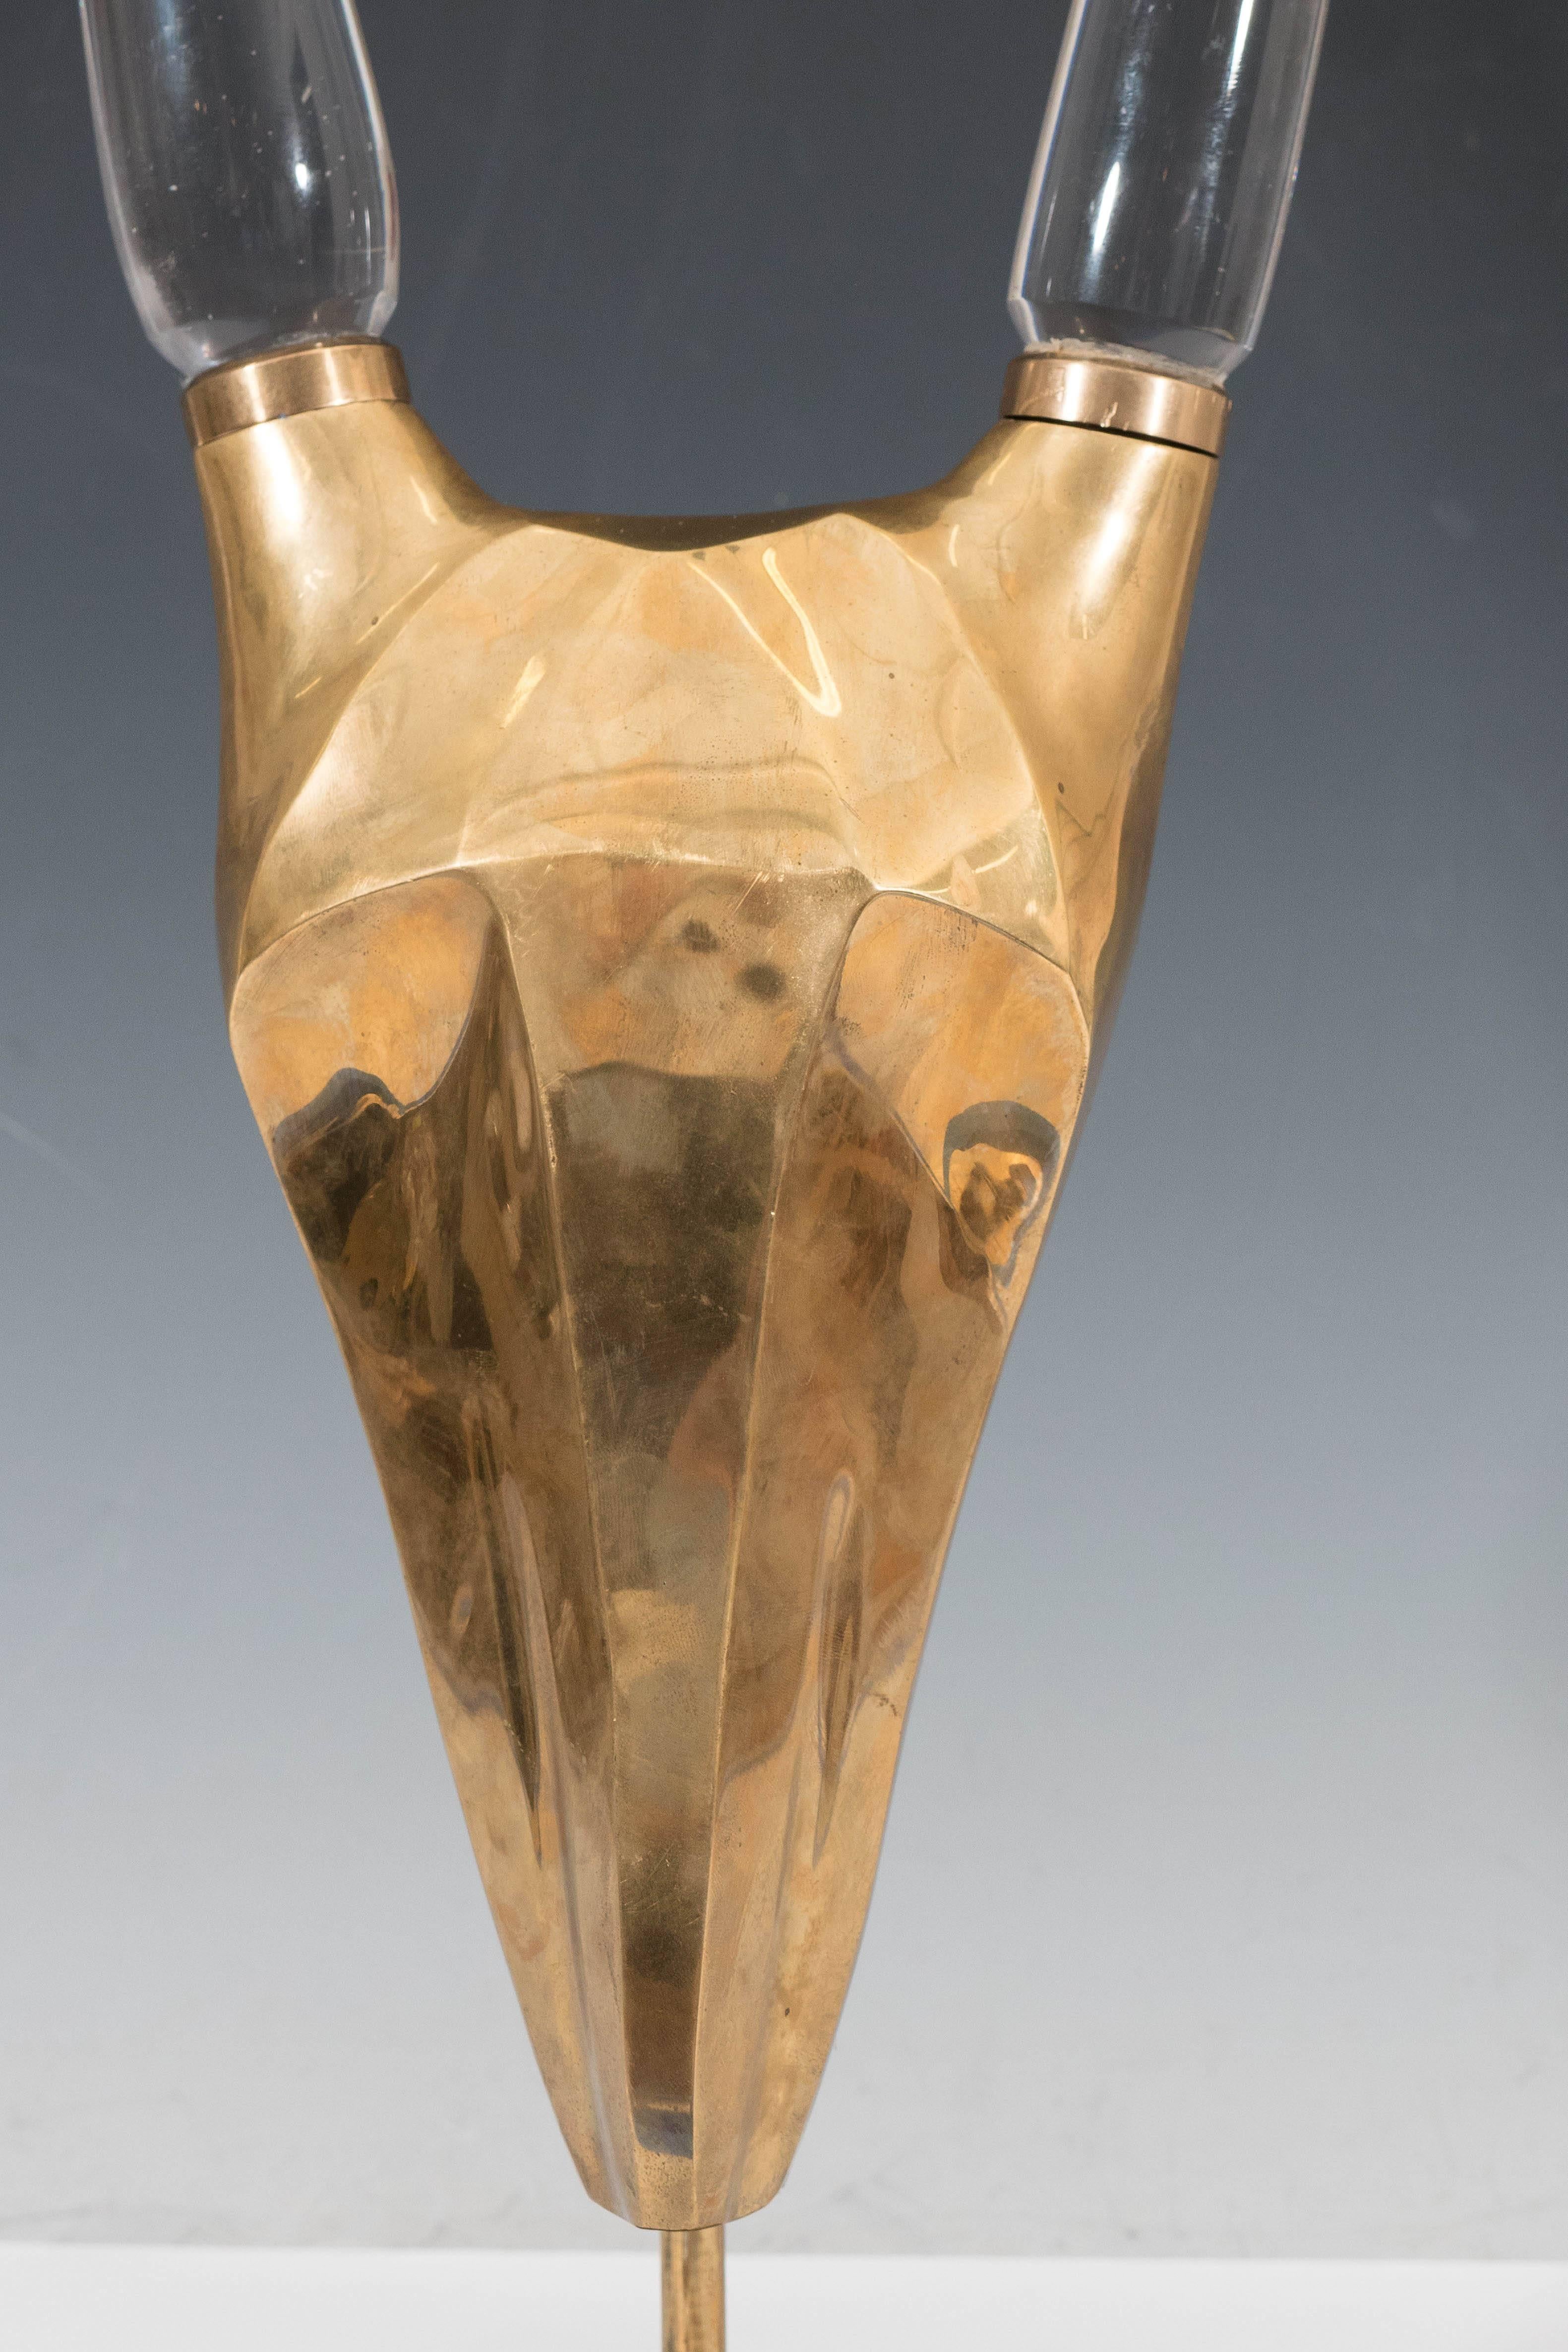 A brass sculpture of a highly modernistic abstracted antelope skull, with beautifully elongated glass horns, set above a hexagonal base. Very good condition, with no visible damages and nice age appropriate patina to brass surface, circa 1970s.